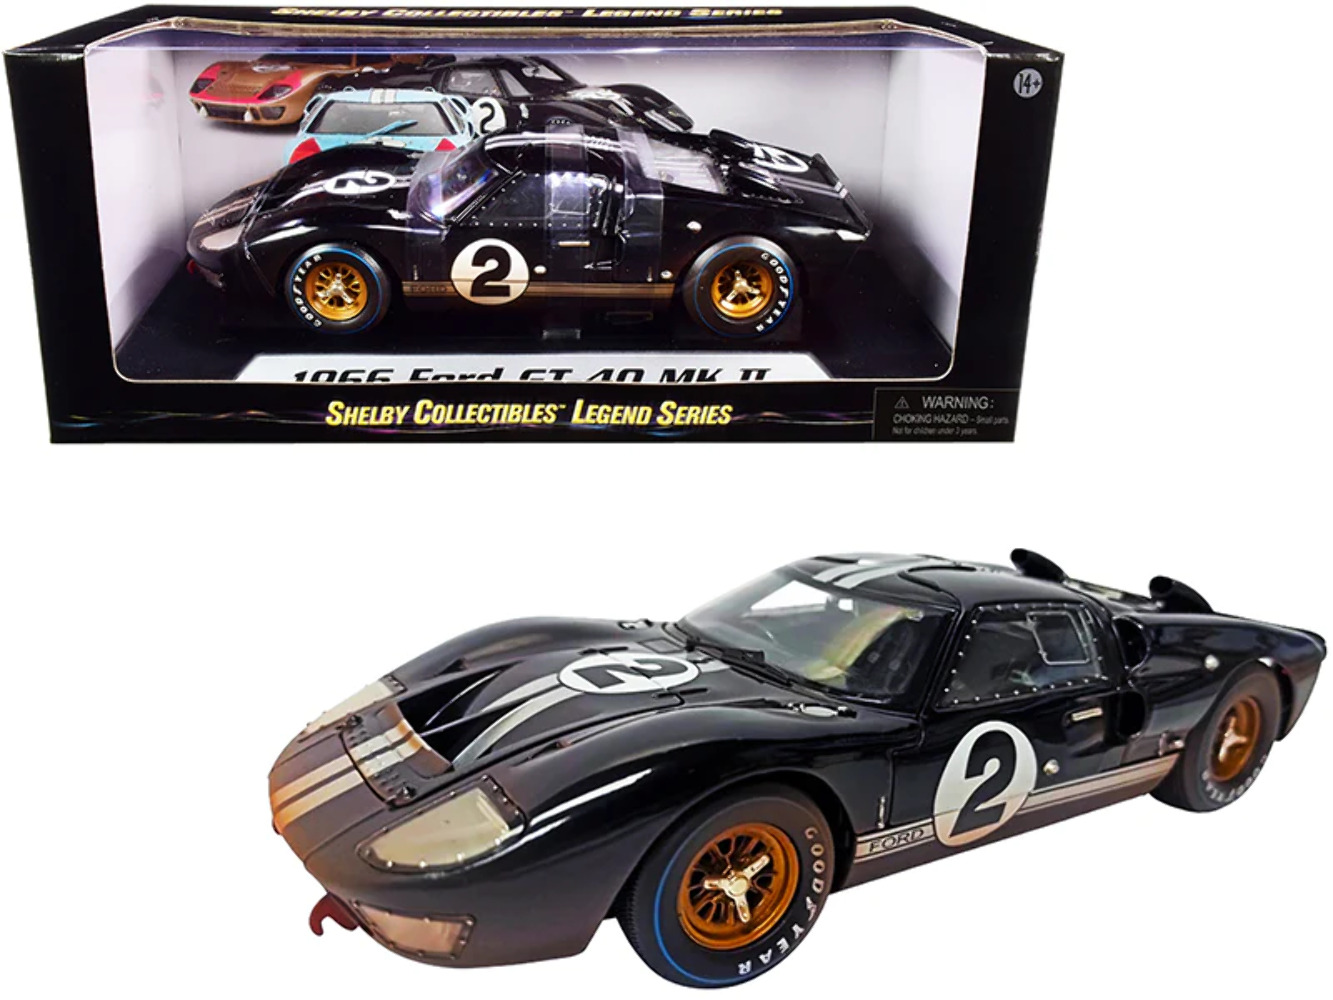 1966 Ford GT-40 MK II #2 Black with Silver Stripes After Race (Dirty Version) 1/